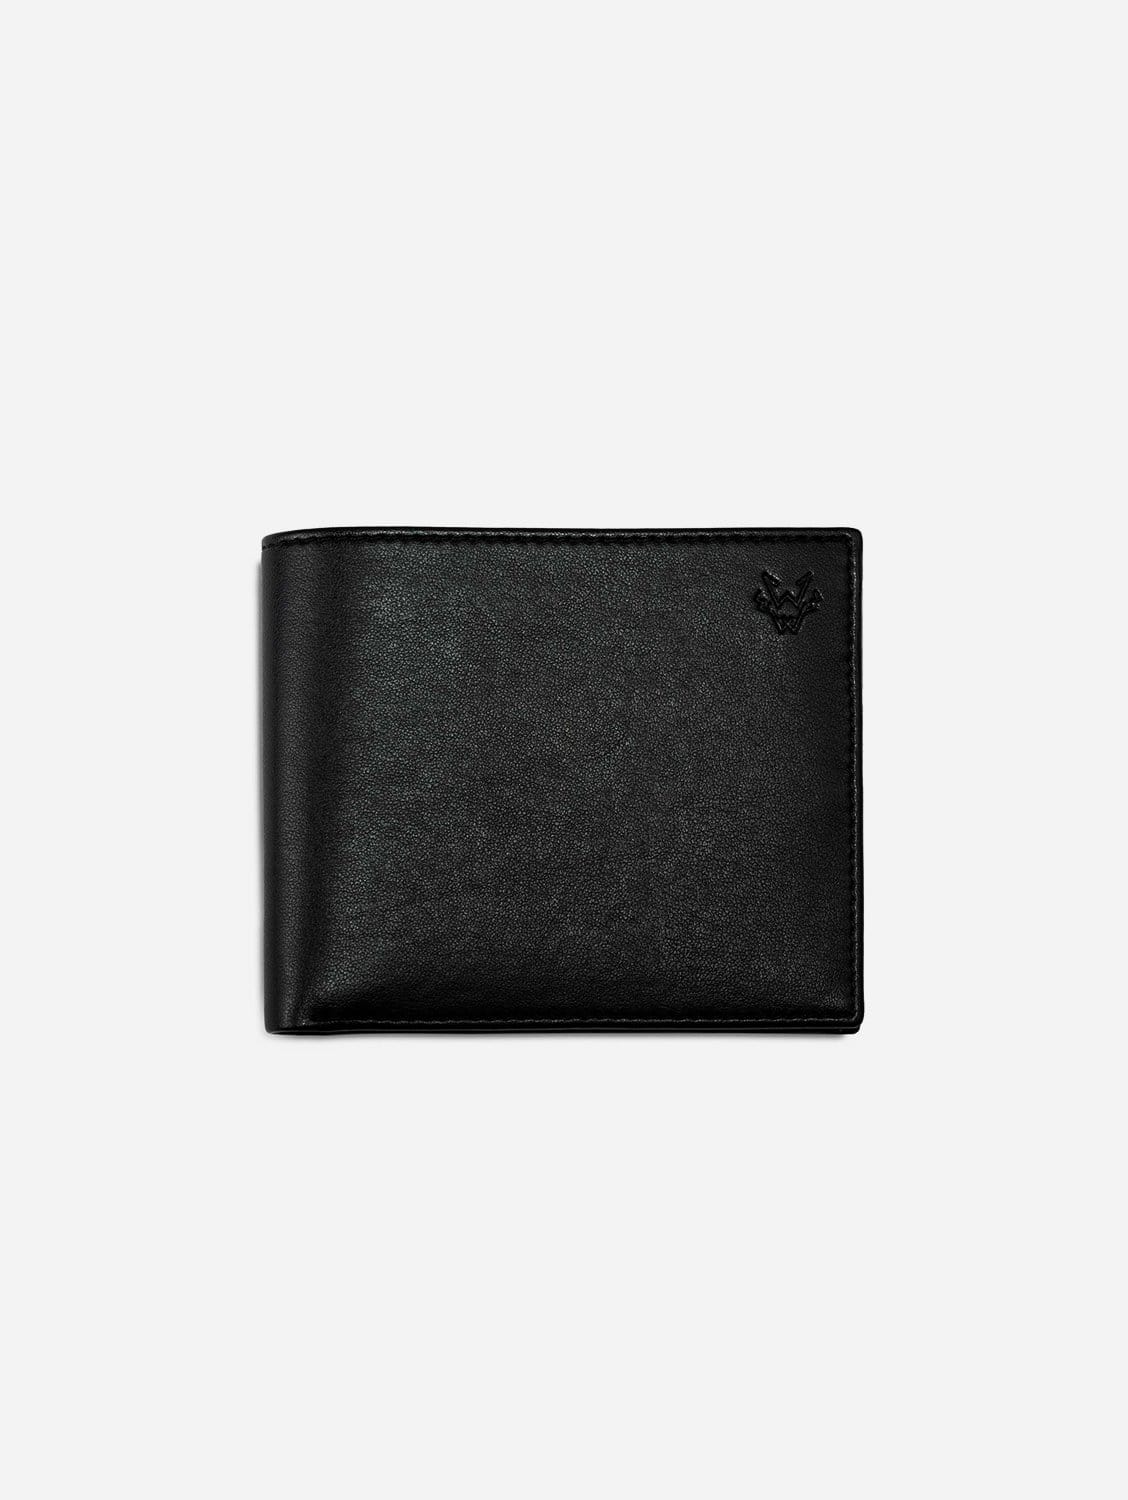 Watson & Wolfe Vegan Leather RFID Protective Wallet with Coin Pocket | Black & Red